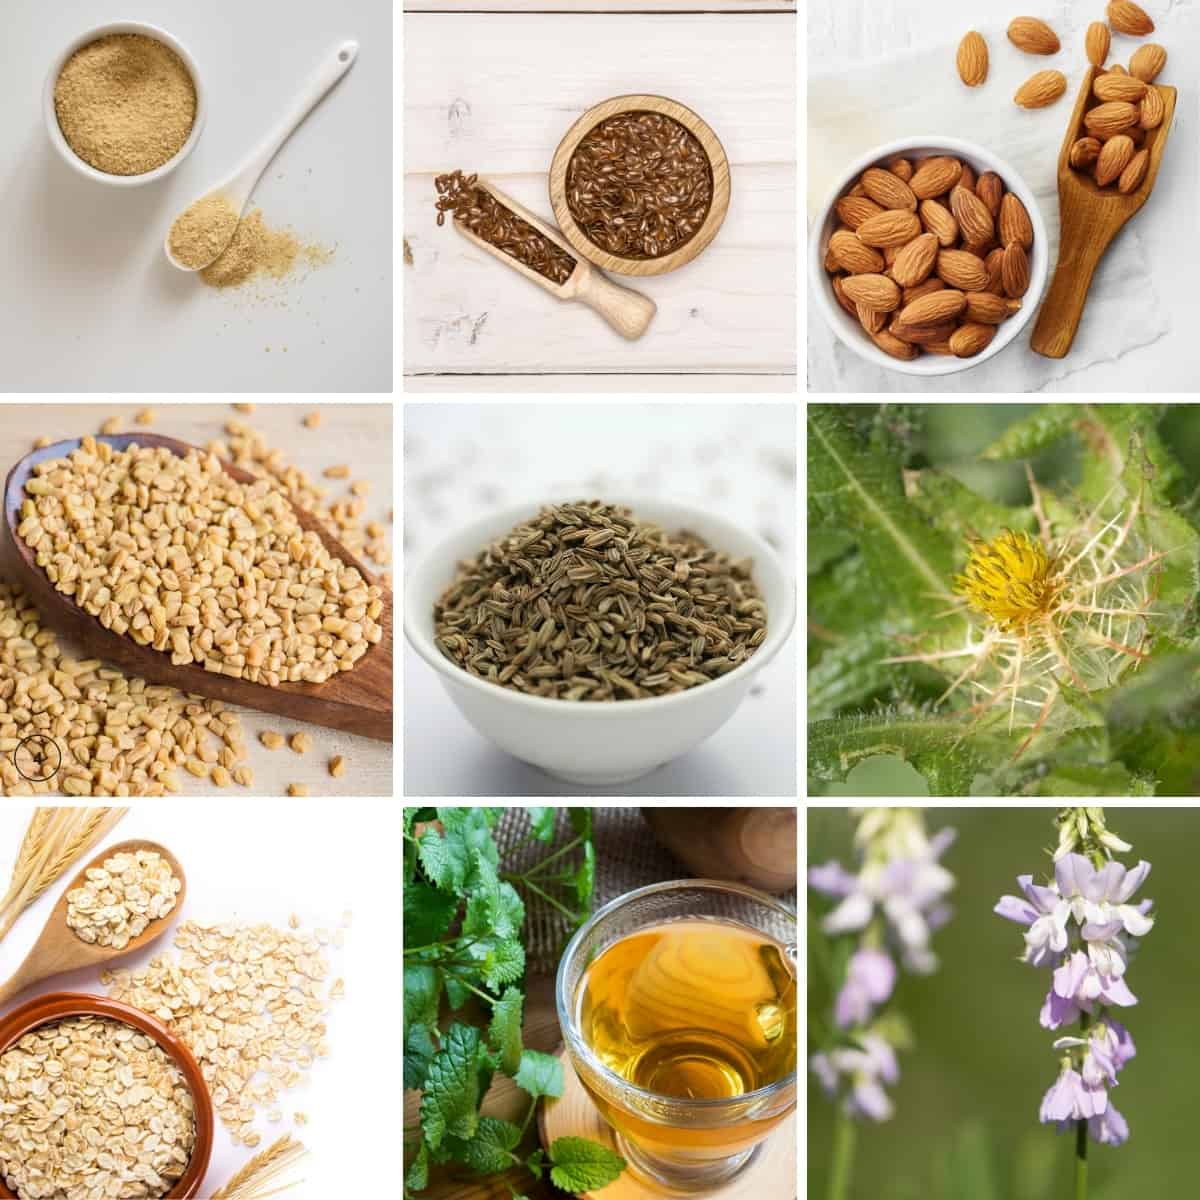 8 photo collage of natural galactagogues: Oats, goats rue, flax seed, almonds, fenugreek, fennel. brewers yeast, lemon balm, blessed thistle